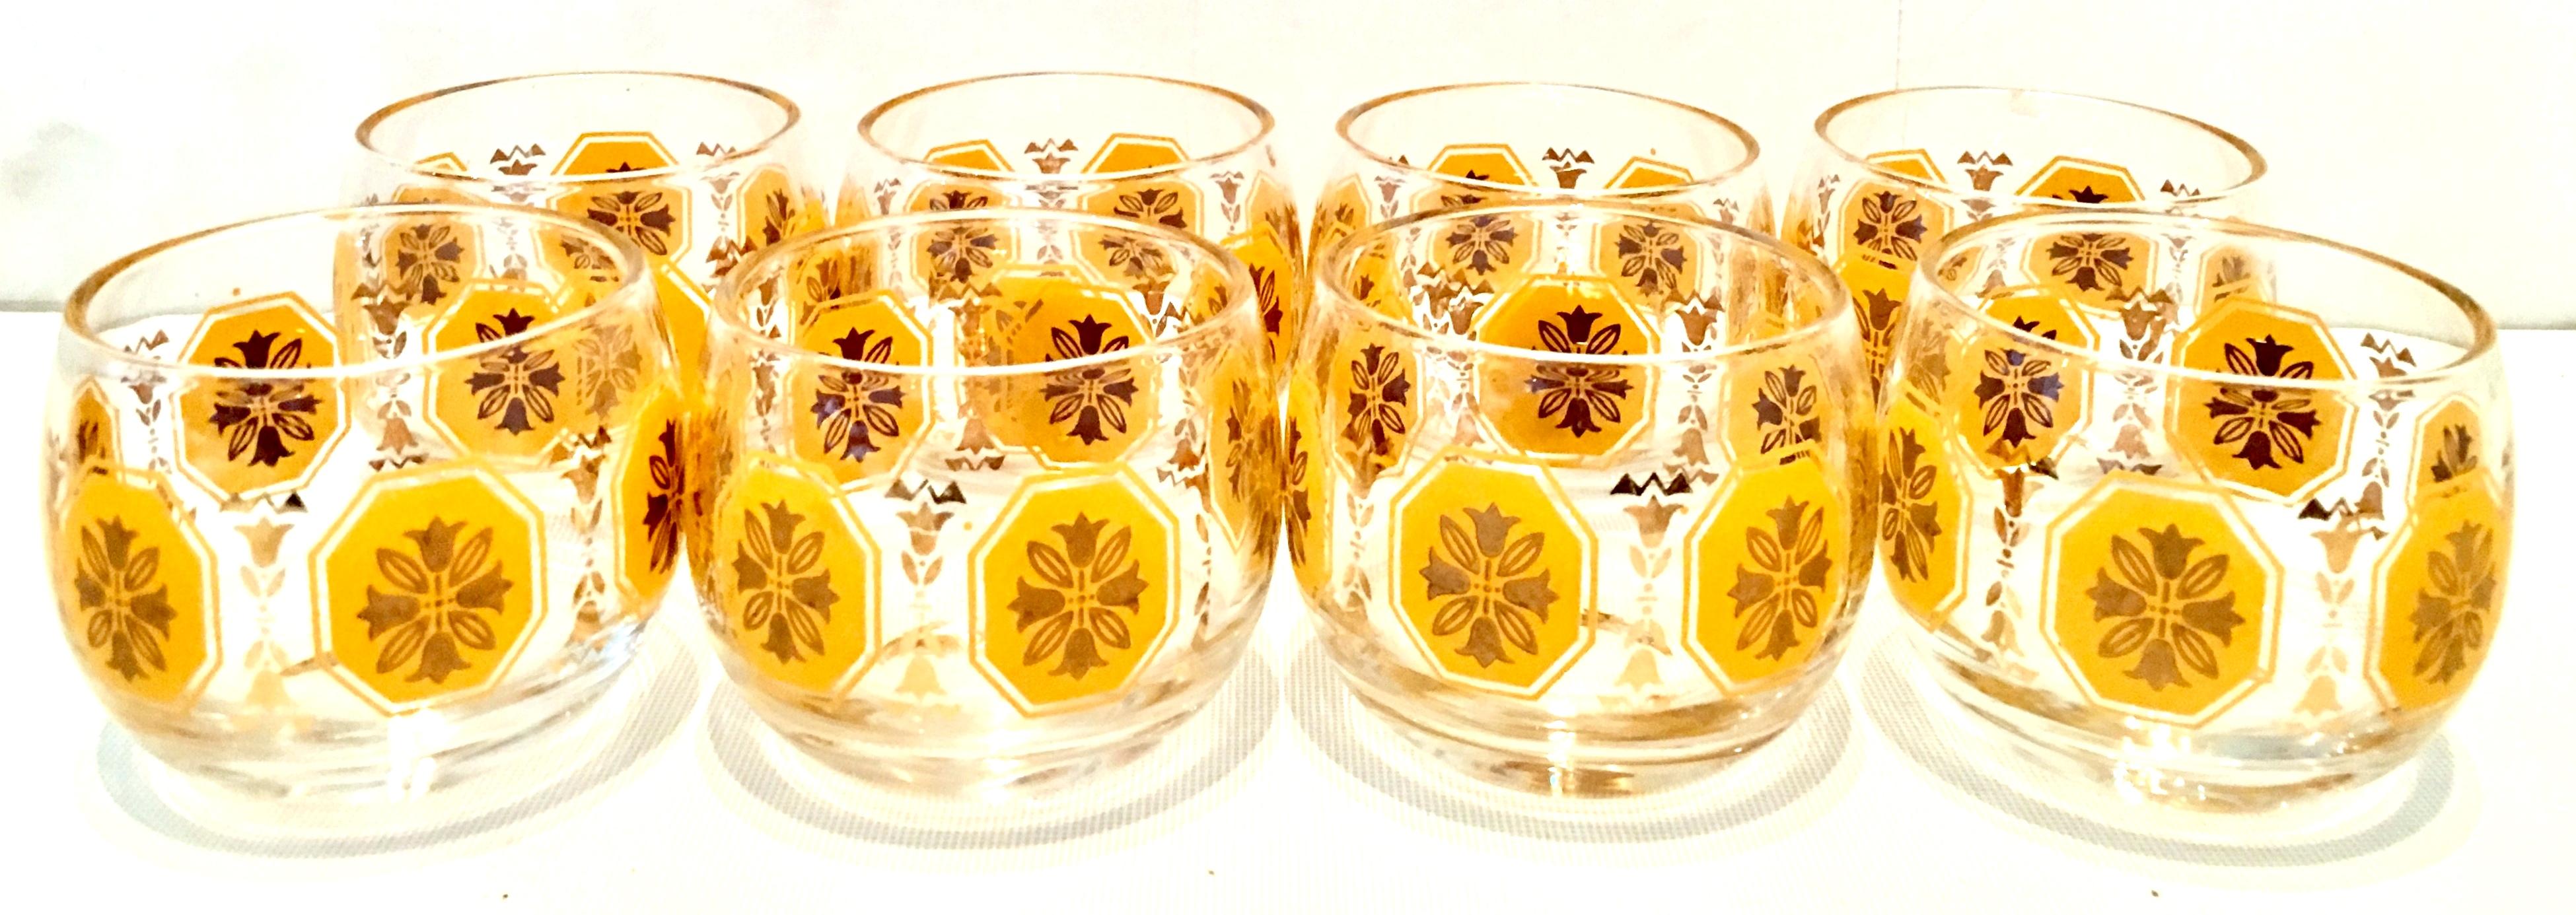 Midcentury Venetian Style 22-Karat Gold Drinks Set of 15 by, Georges Briard For Sale 2